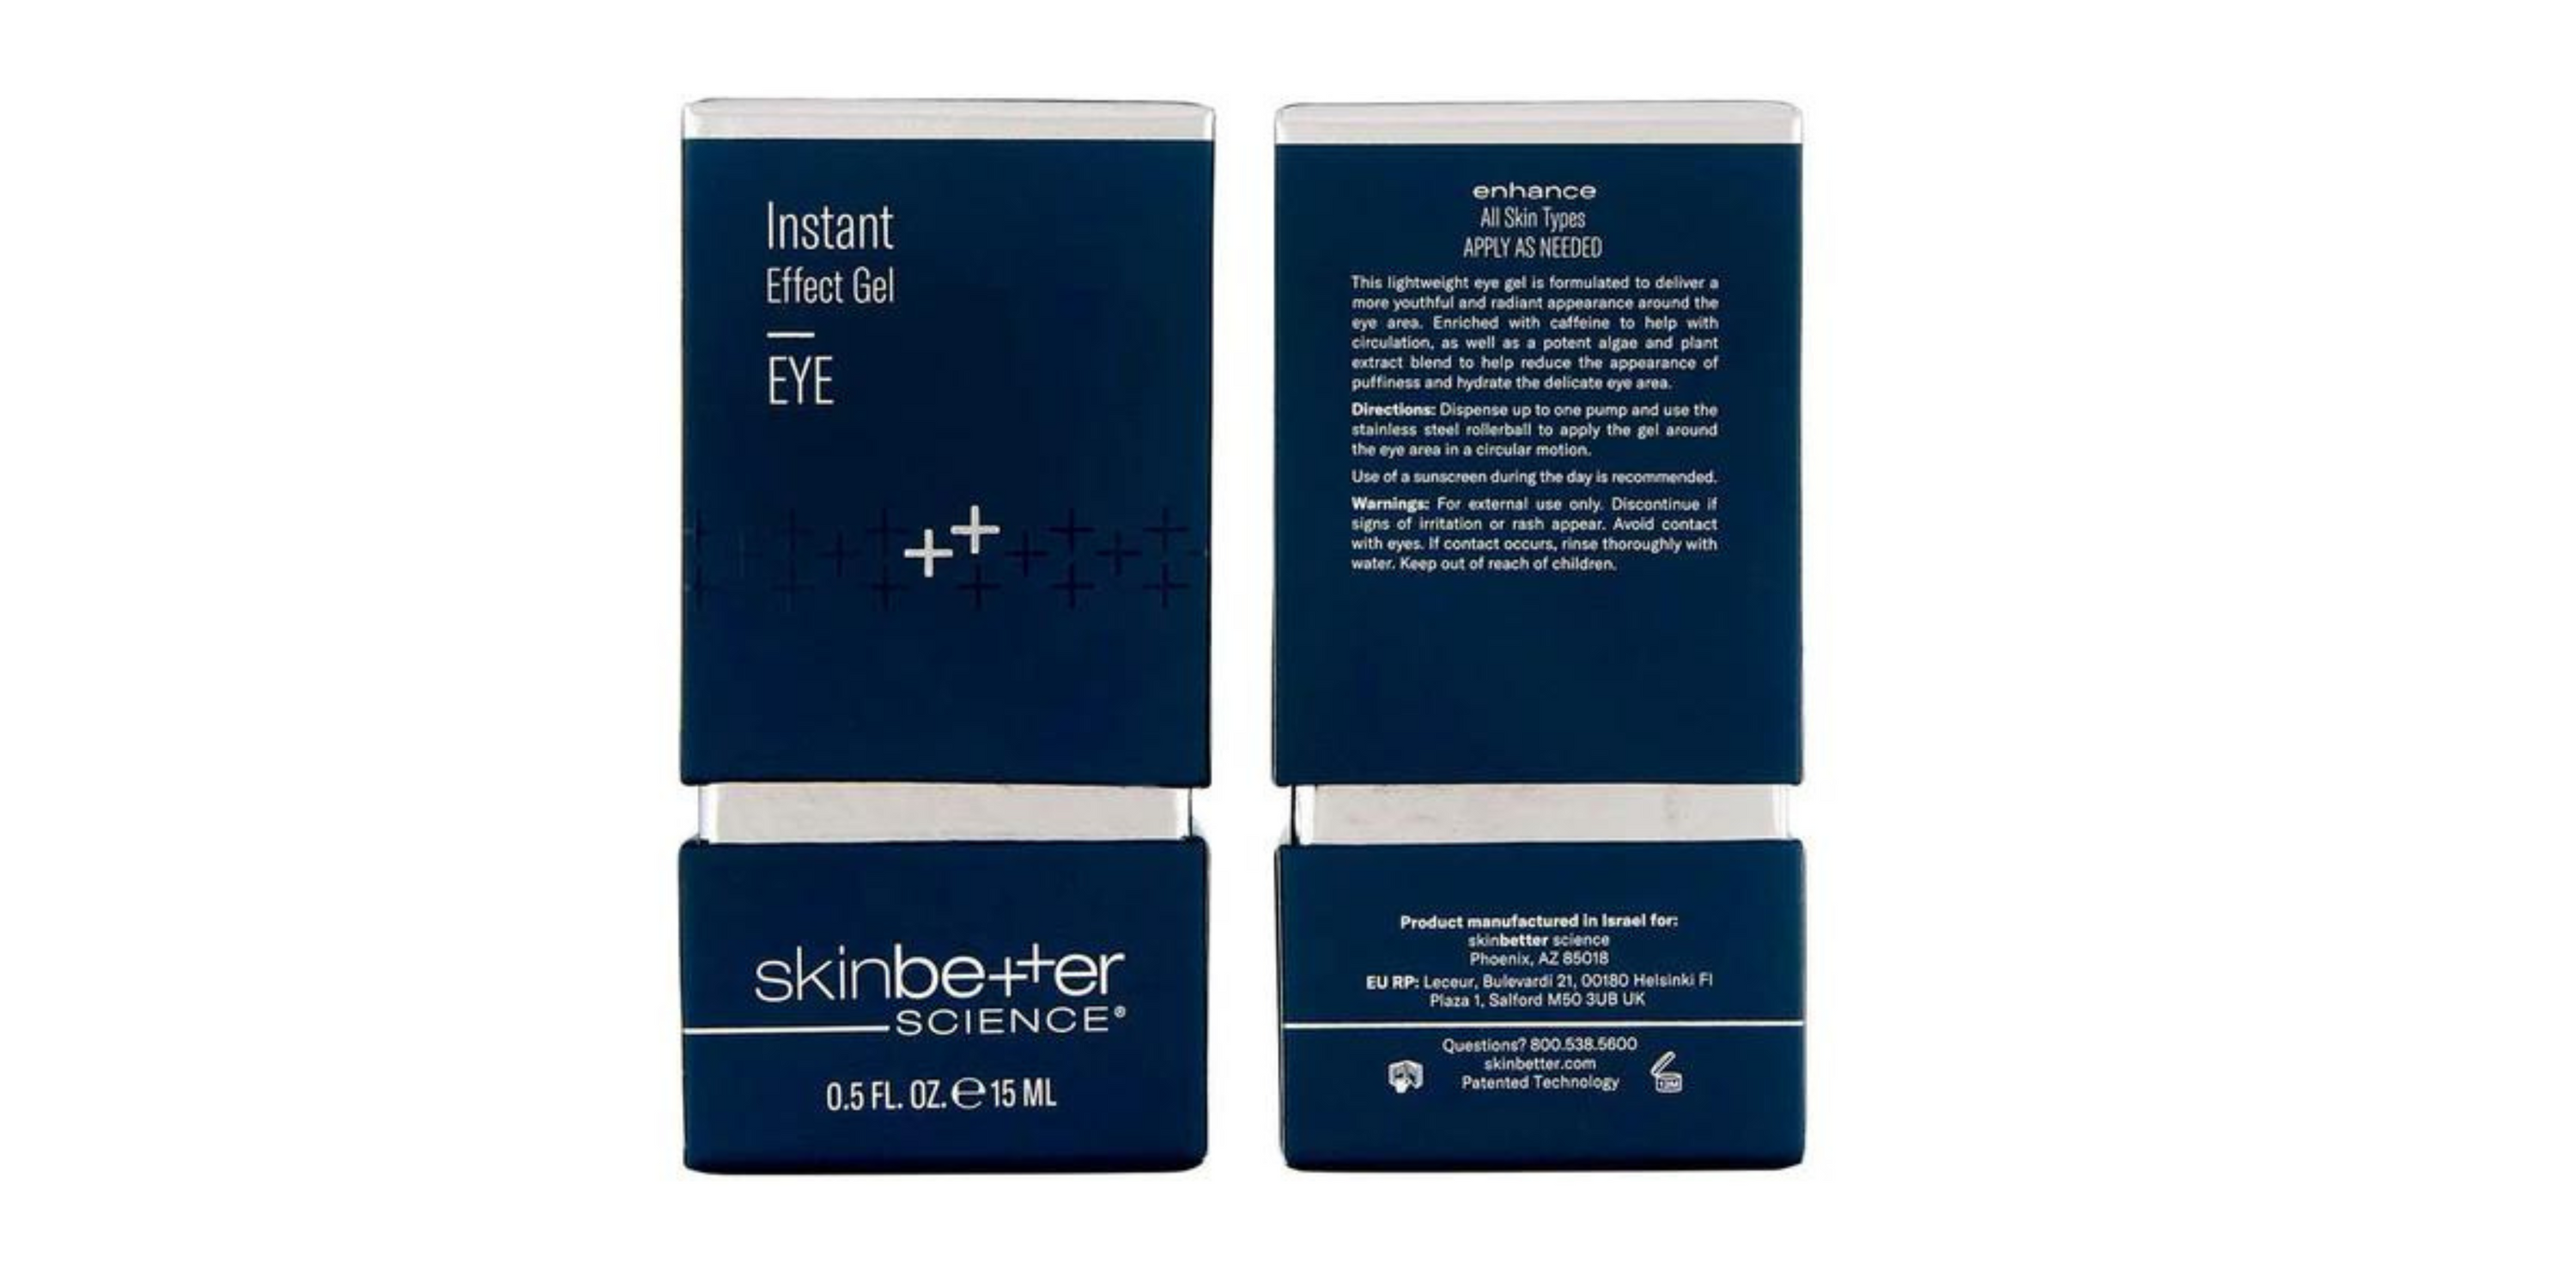 The Pros and Cons of the SKINBETTER SCIENCE Rejuvenate Transform Lifting Instant Effect Gel EYE 15ml